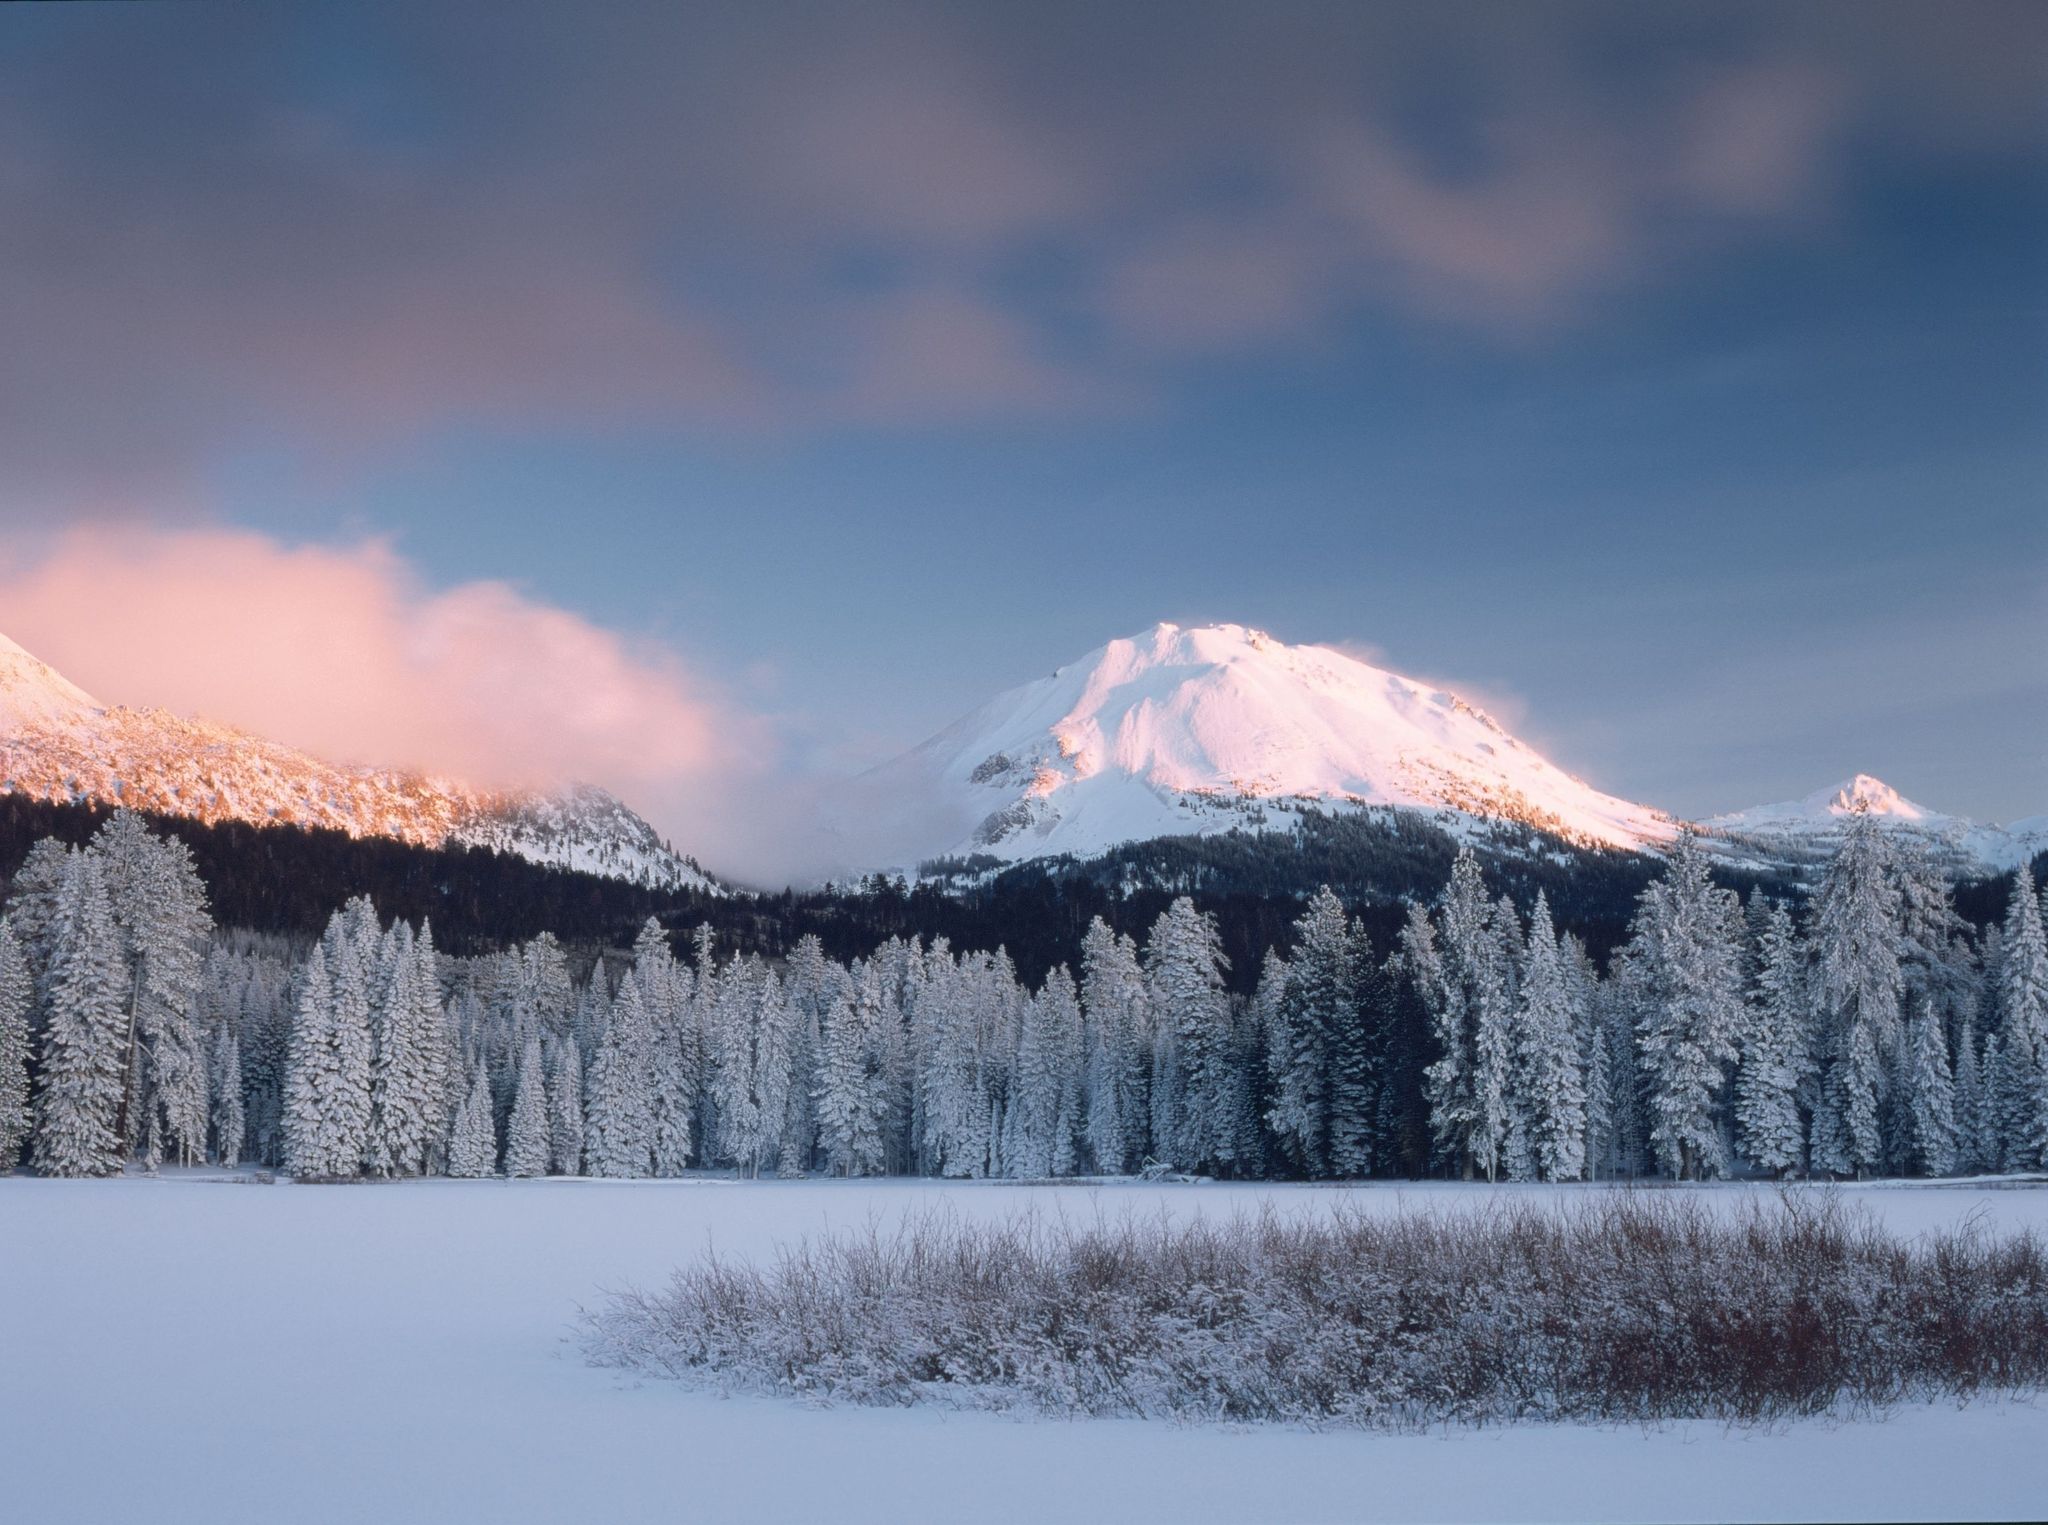 With over 30 feet of snowfall annually, Lassen provides numerous opportunities for winter recreation.